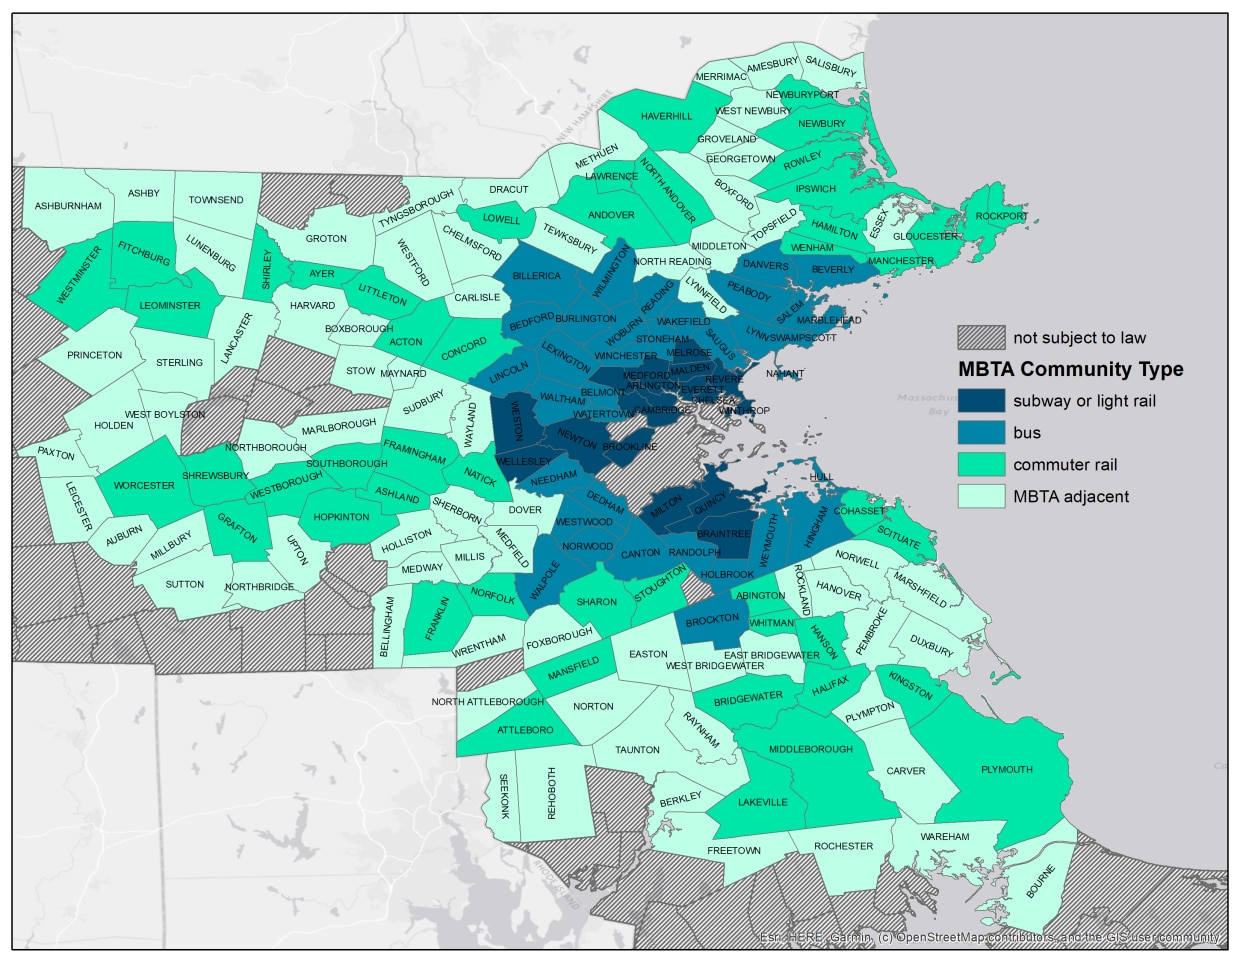 MBTA Communities By Category of Service